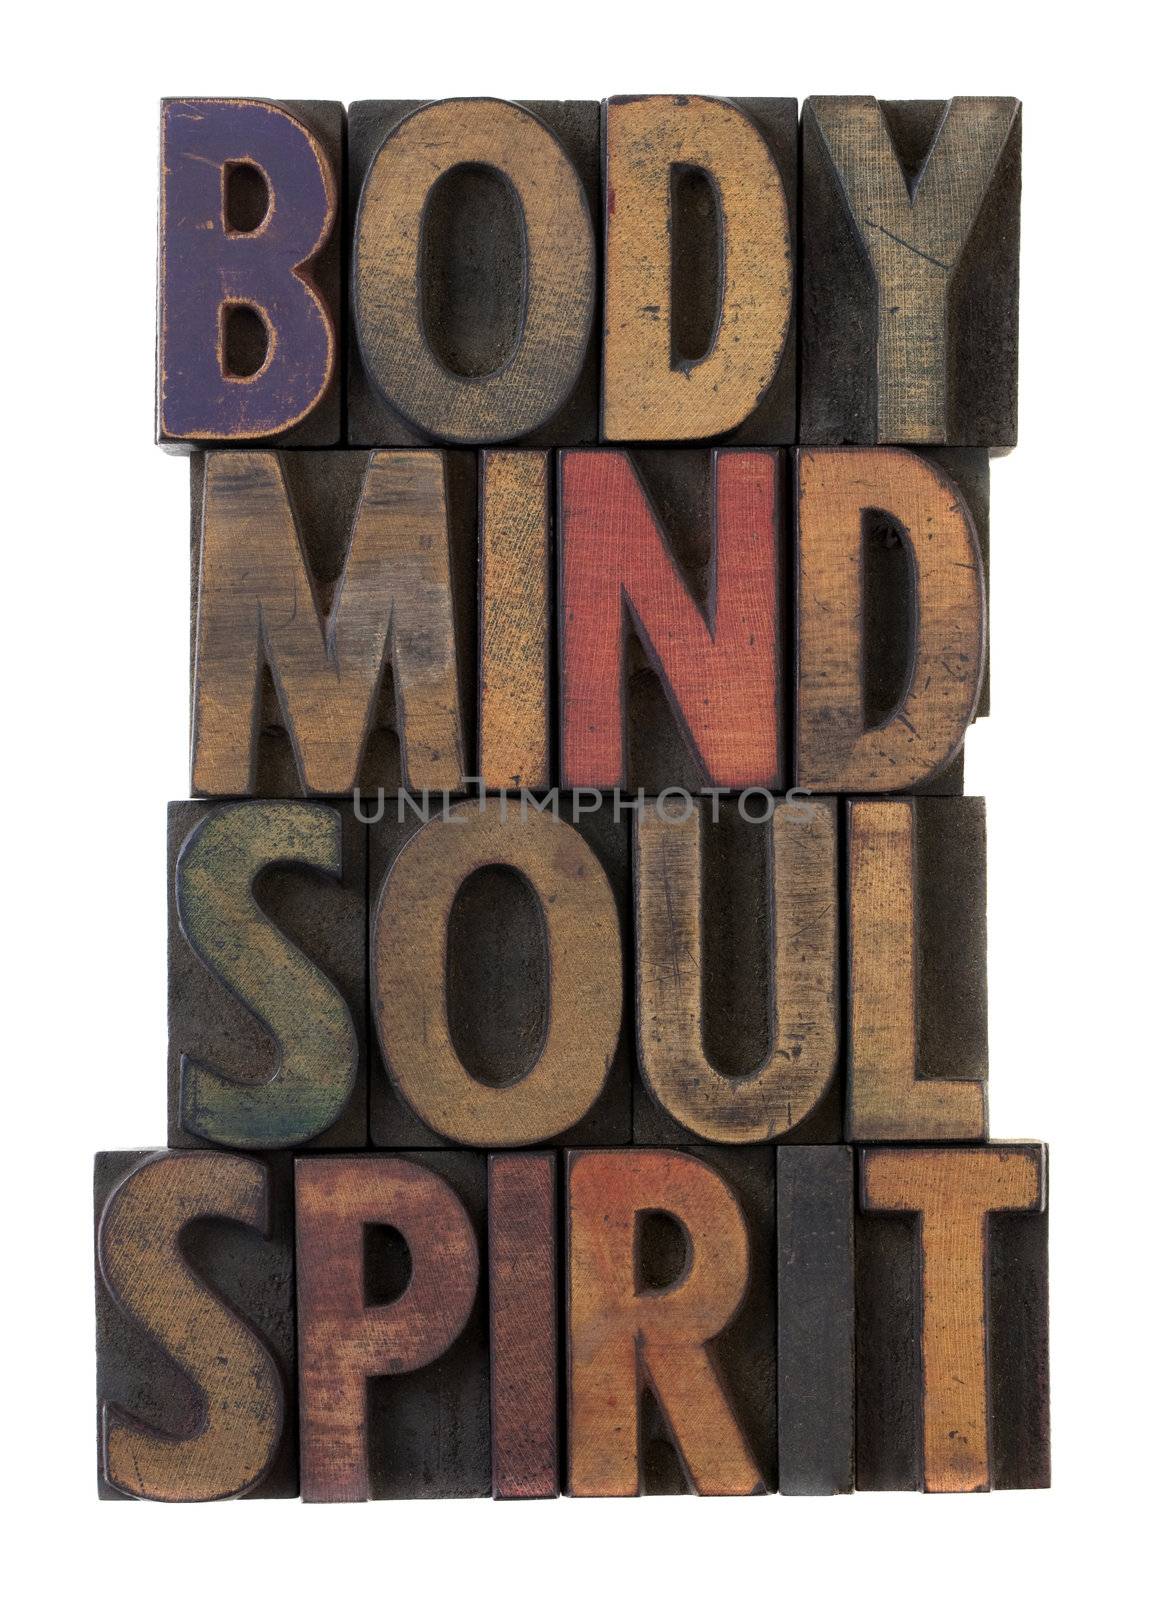 body, mind, soul, spirit in vintage wooden letterpress types, stained by ink in different colors, isolated on white